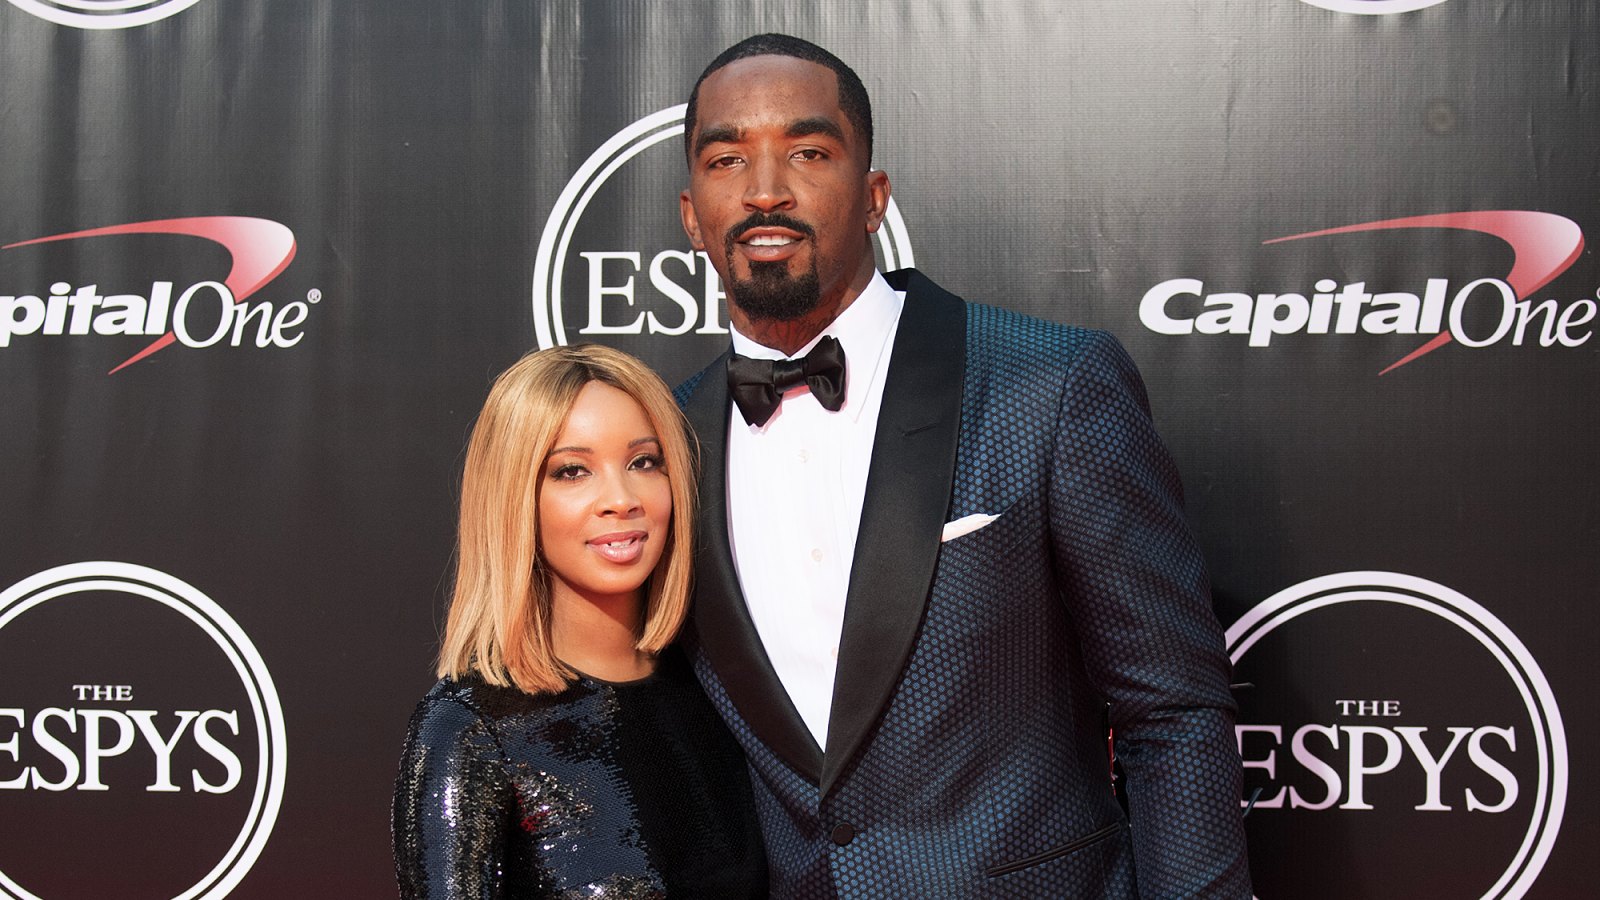 J.R.-Smith-Issues-Response-After-His-Wife-Alleges-He-Cheated